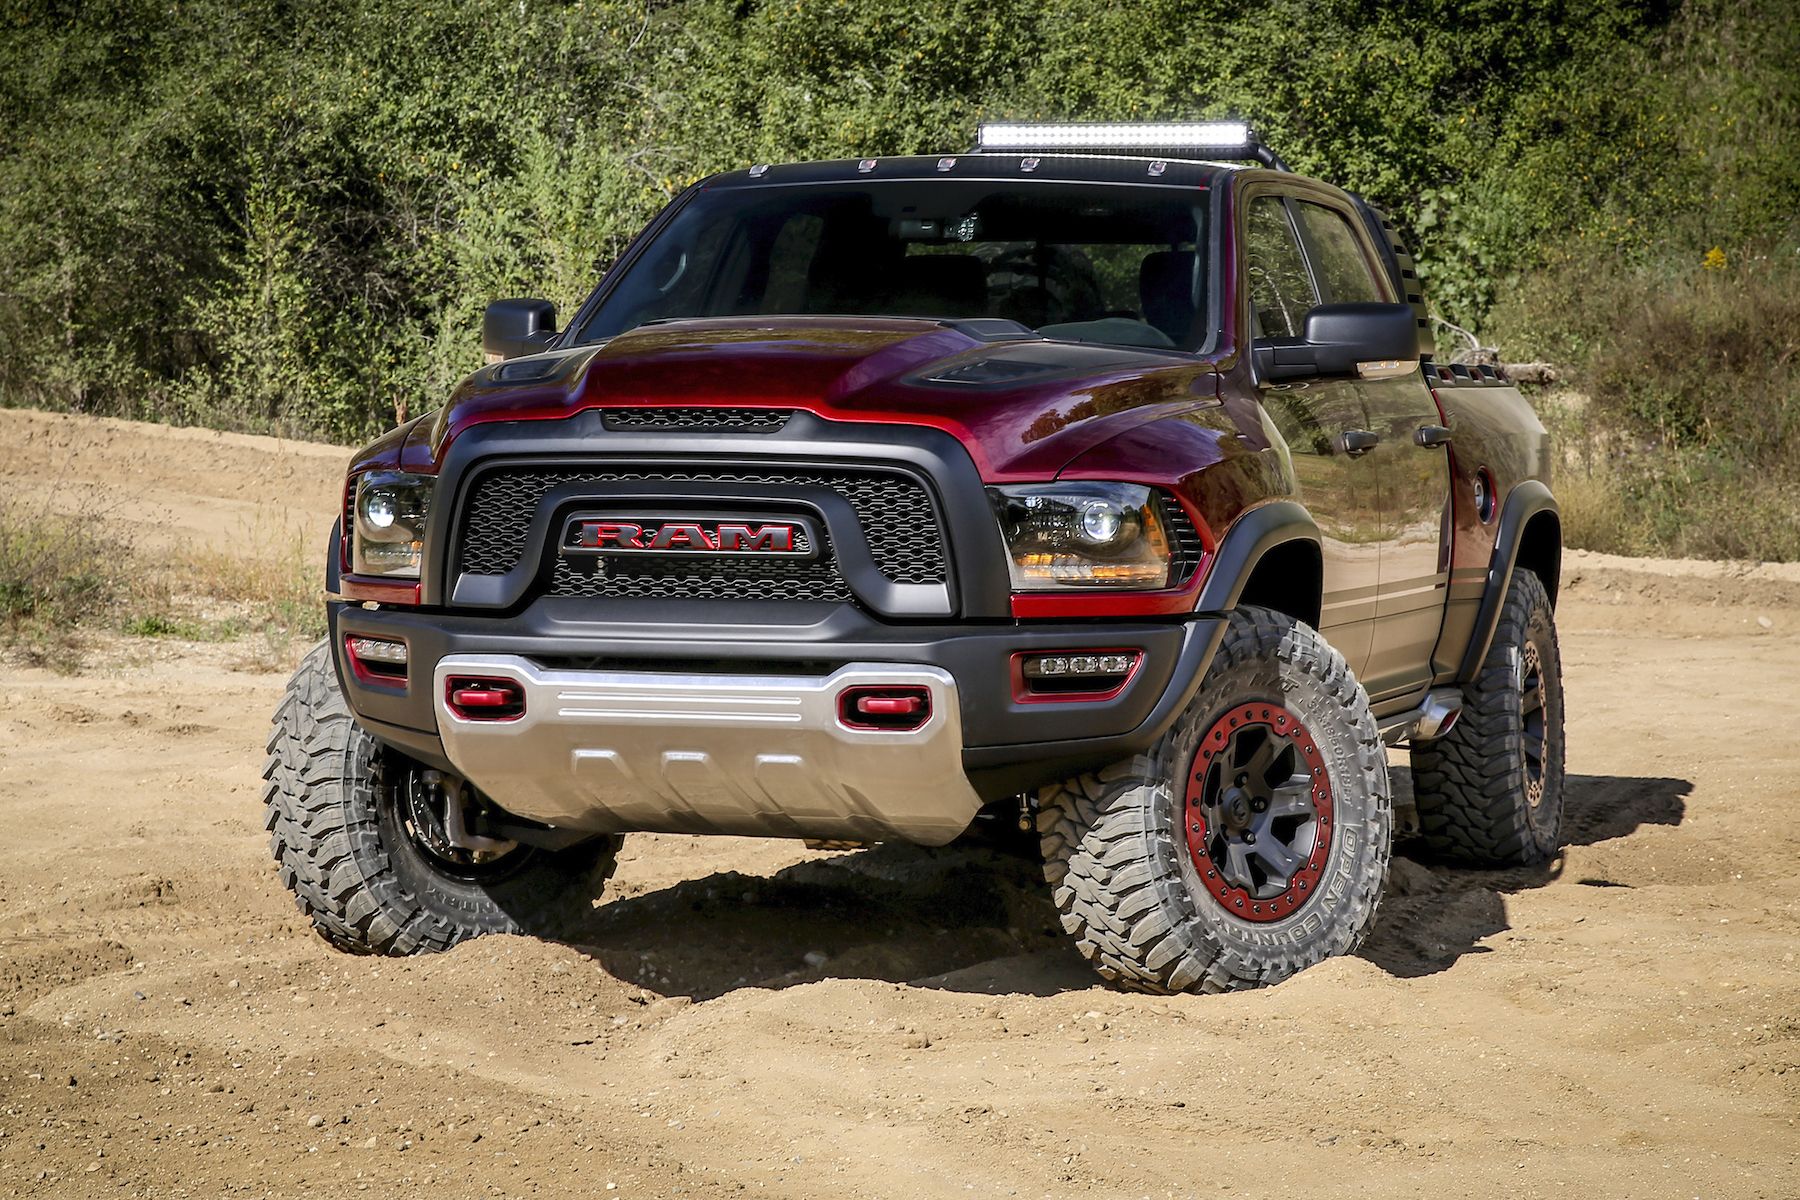 Ram RHO Is a Six-Cylinder TRX with HP